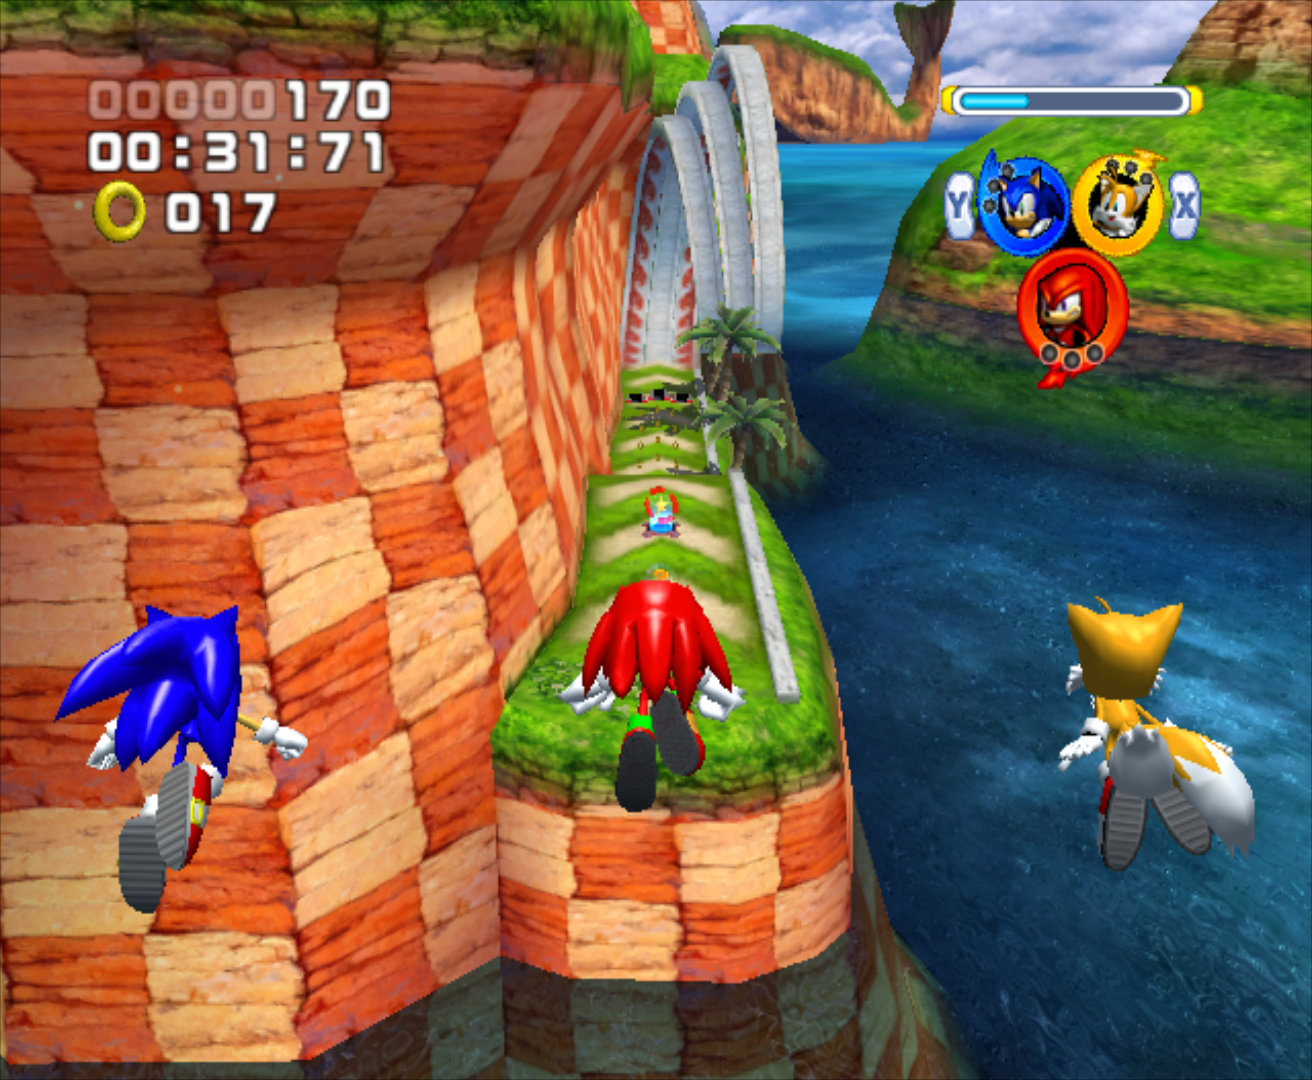 lets play sonic heroes